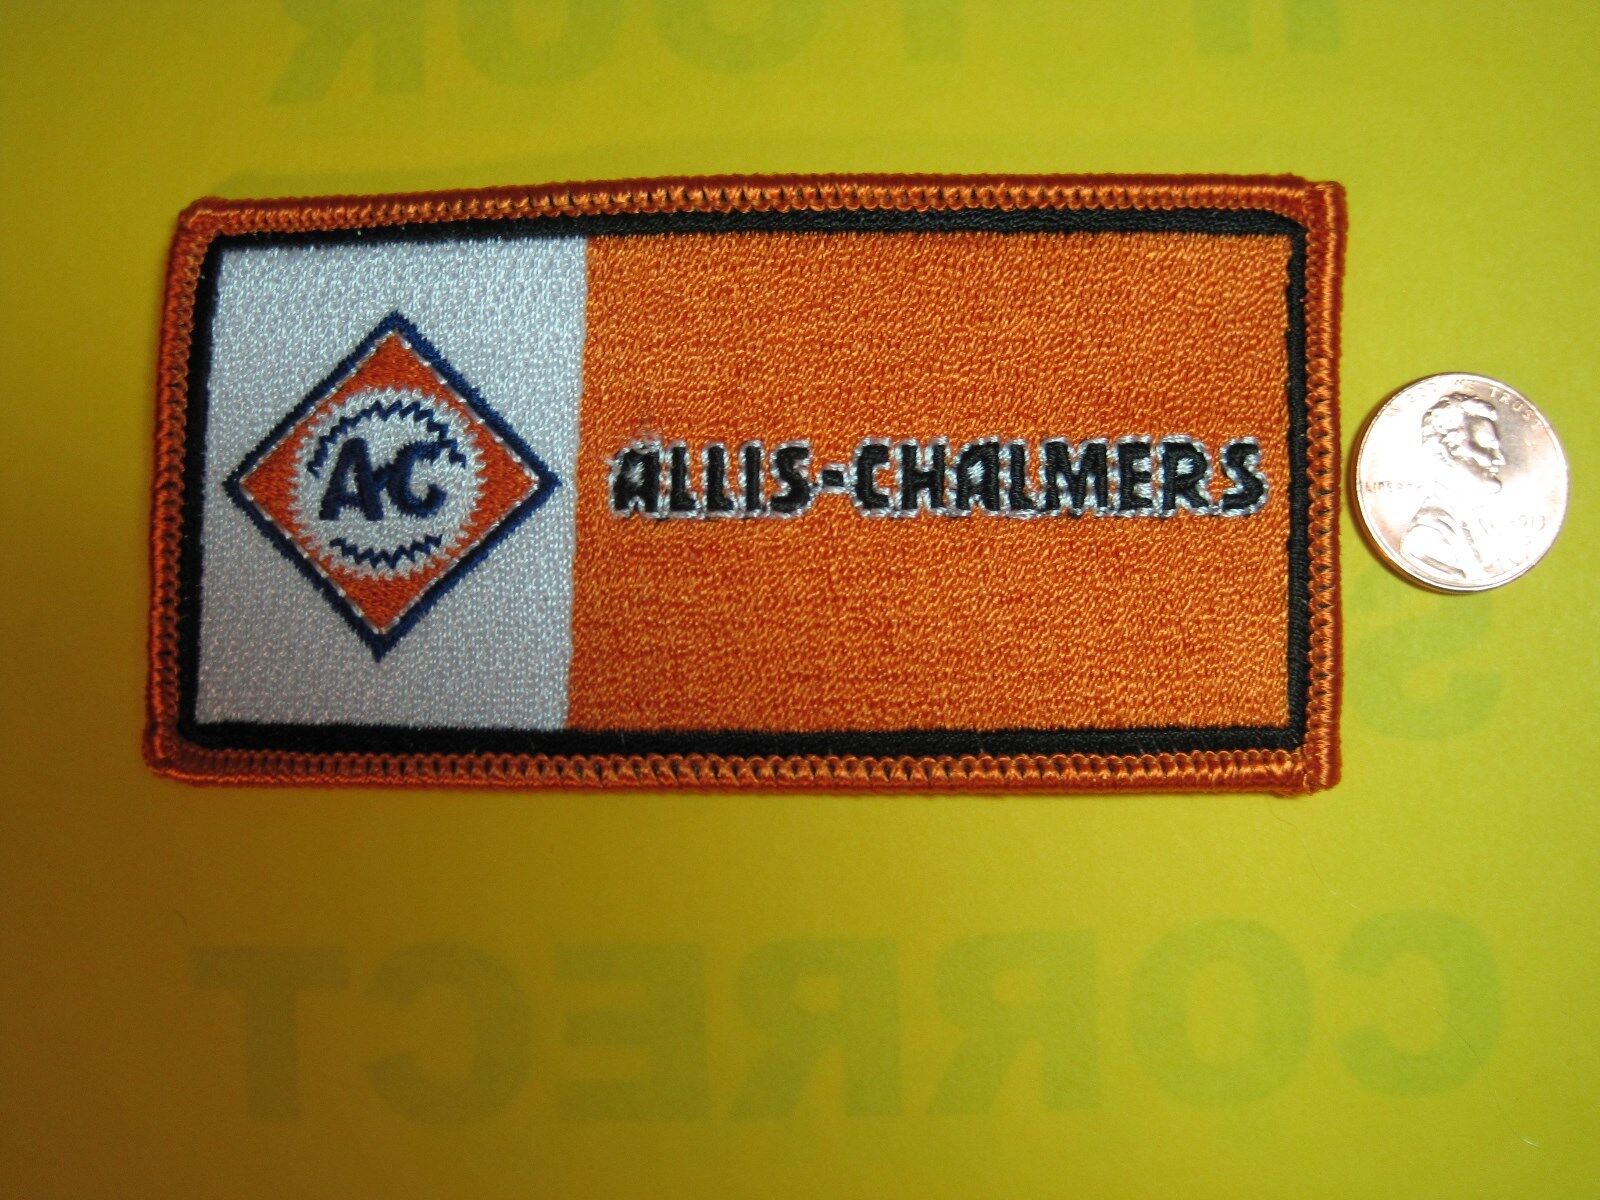 FARM TRACTOR PATCH ALLIS-CHALMERS TRACTOR LOOK AND BUY NOW FARM AND RANCH GEAR Без бренда